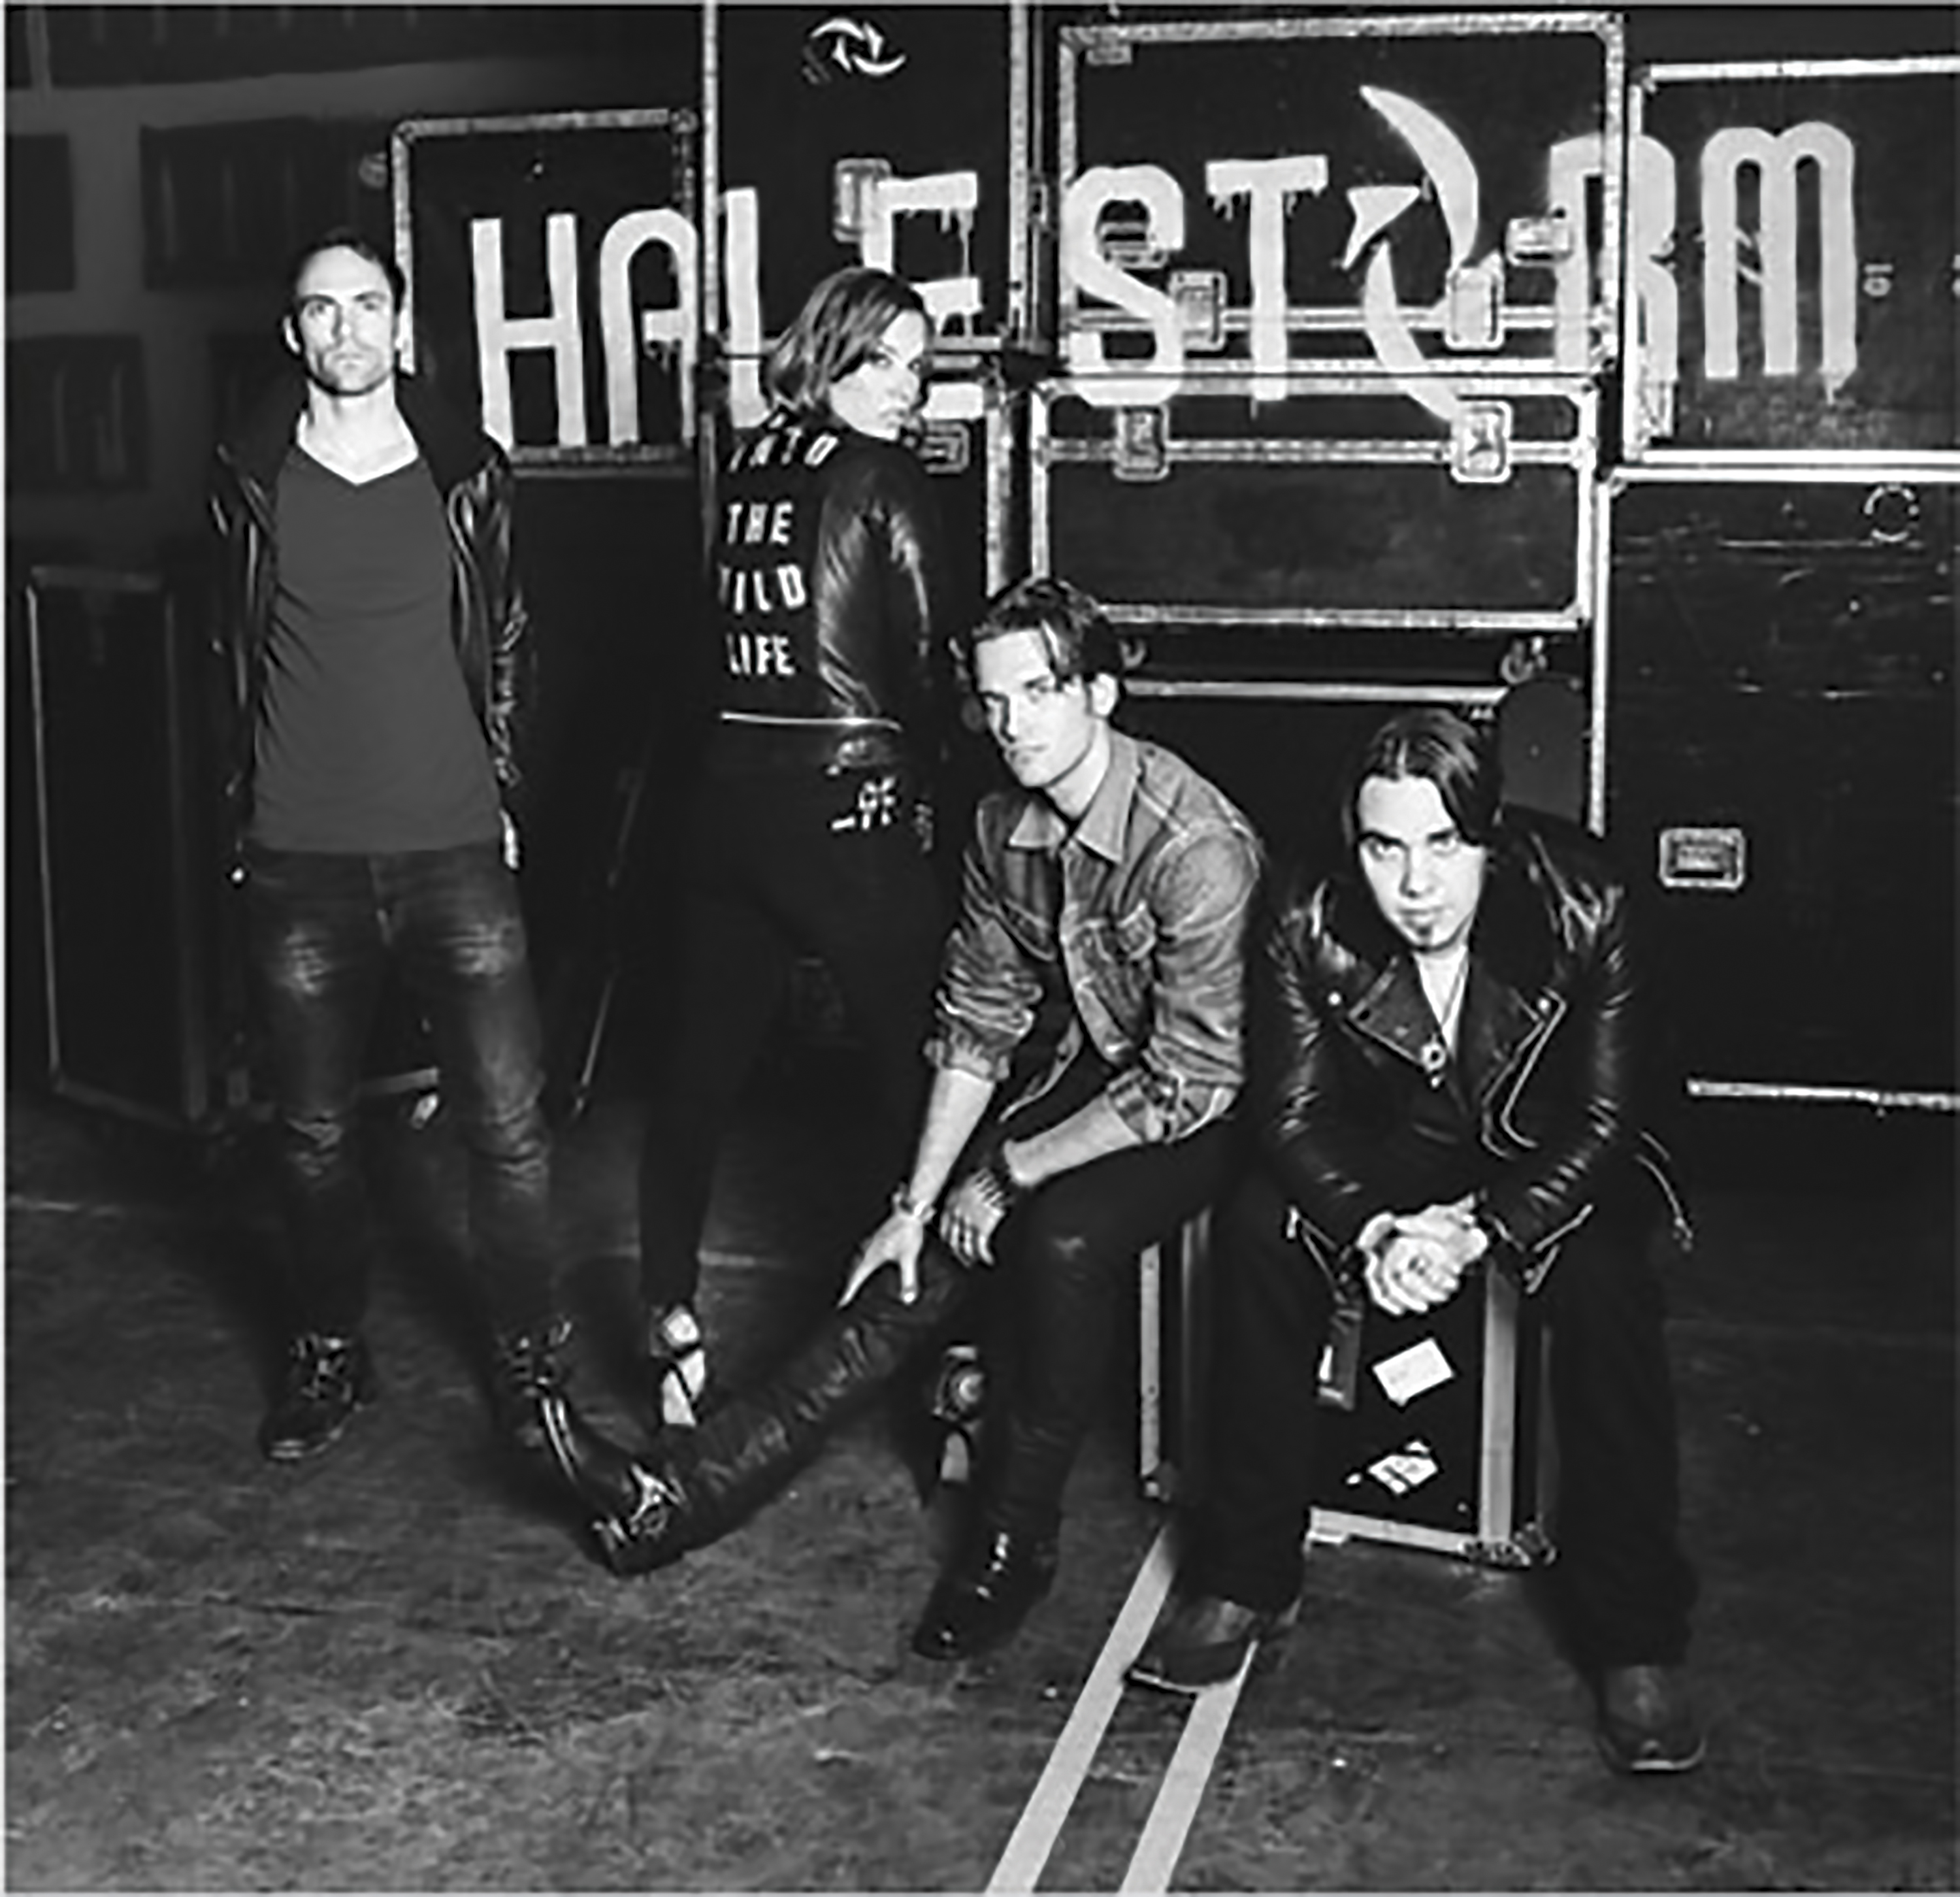 Halestorm takes fans ‘Into the Wild Life’